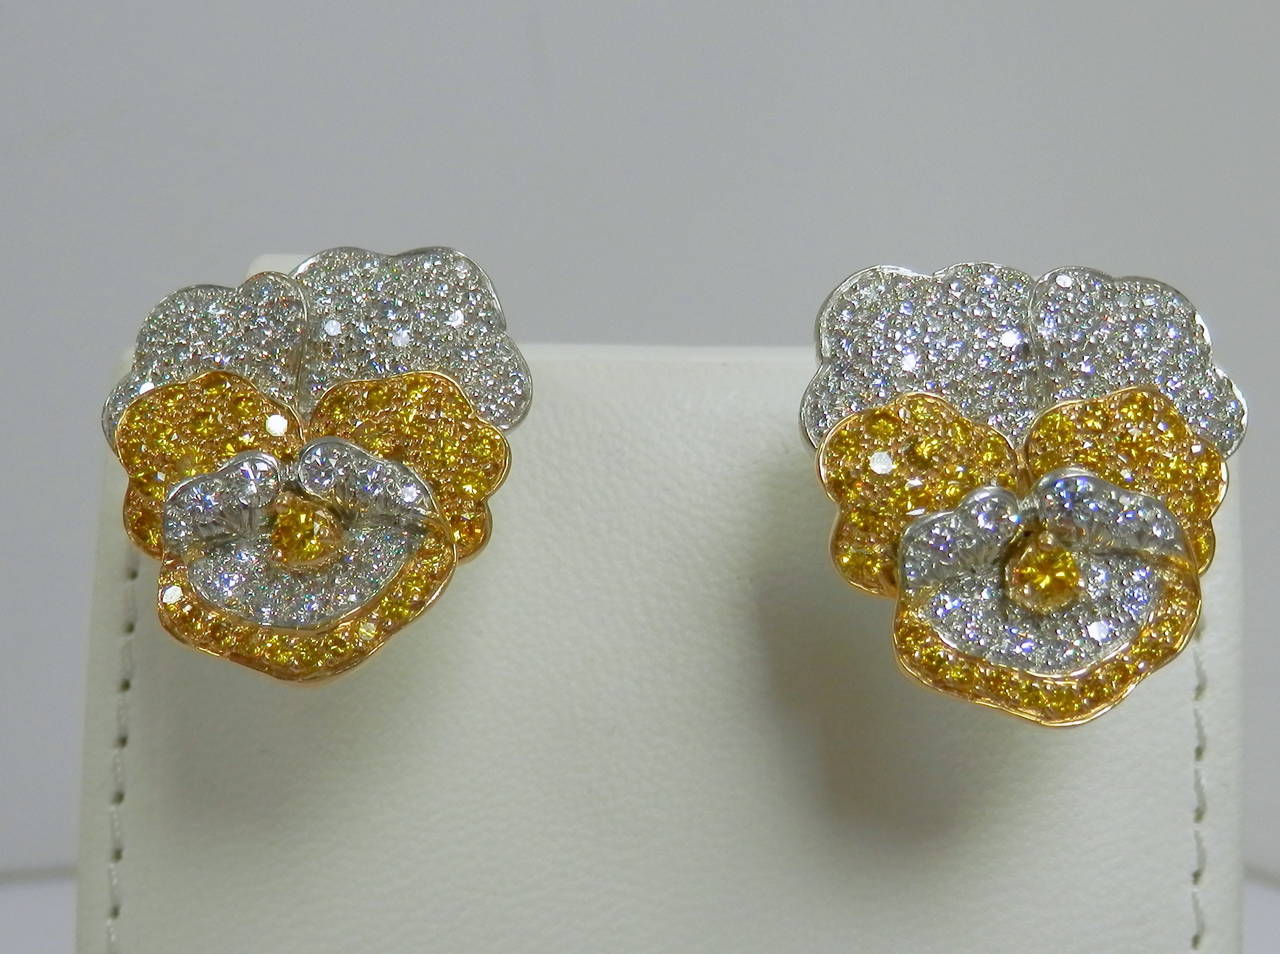 Platinum and 18K yellow gold "Pansy" motif earrings with approx. 1.93 cts of Intense to vivid yellow diamonds and 2.28 cts of white (F) diamonds. Signed and numbered Oscar Heyman.